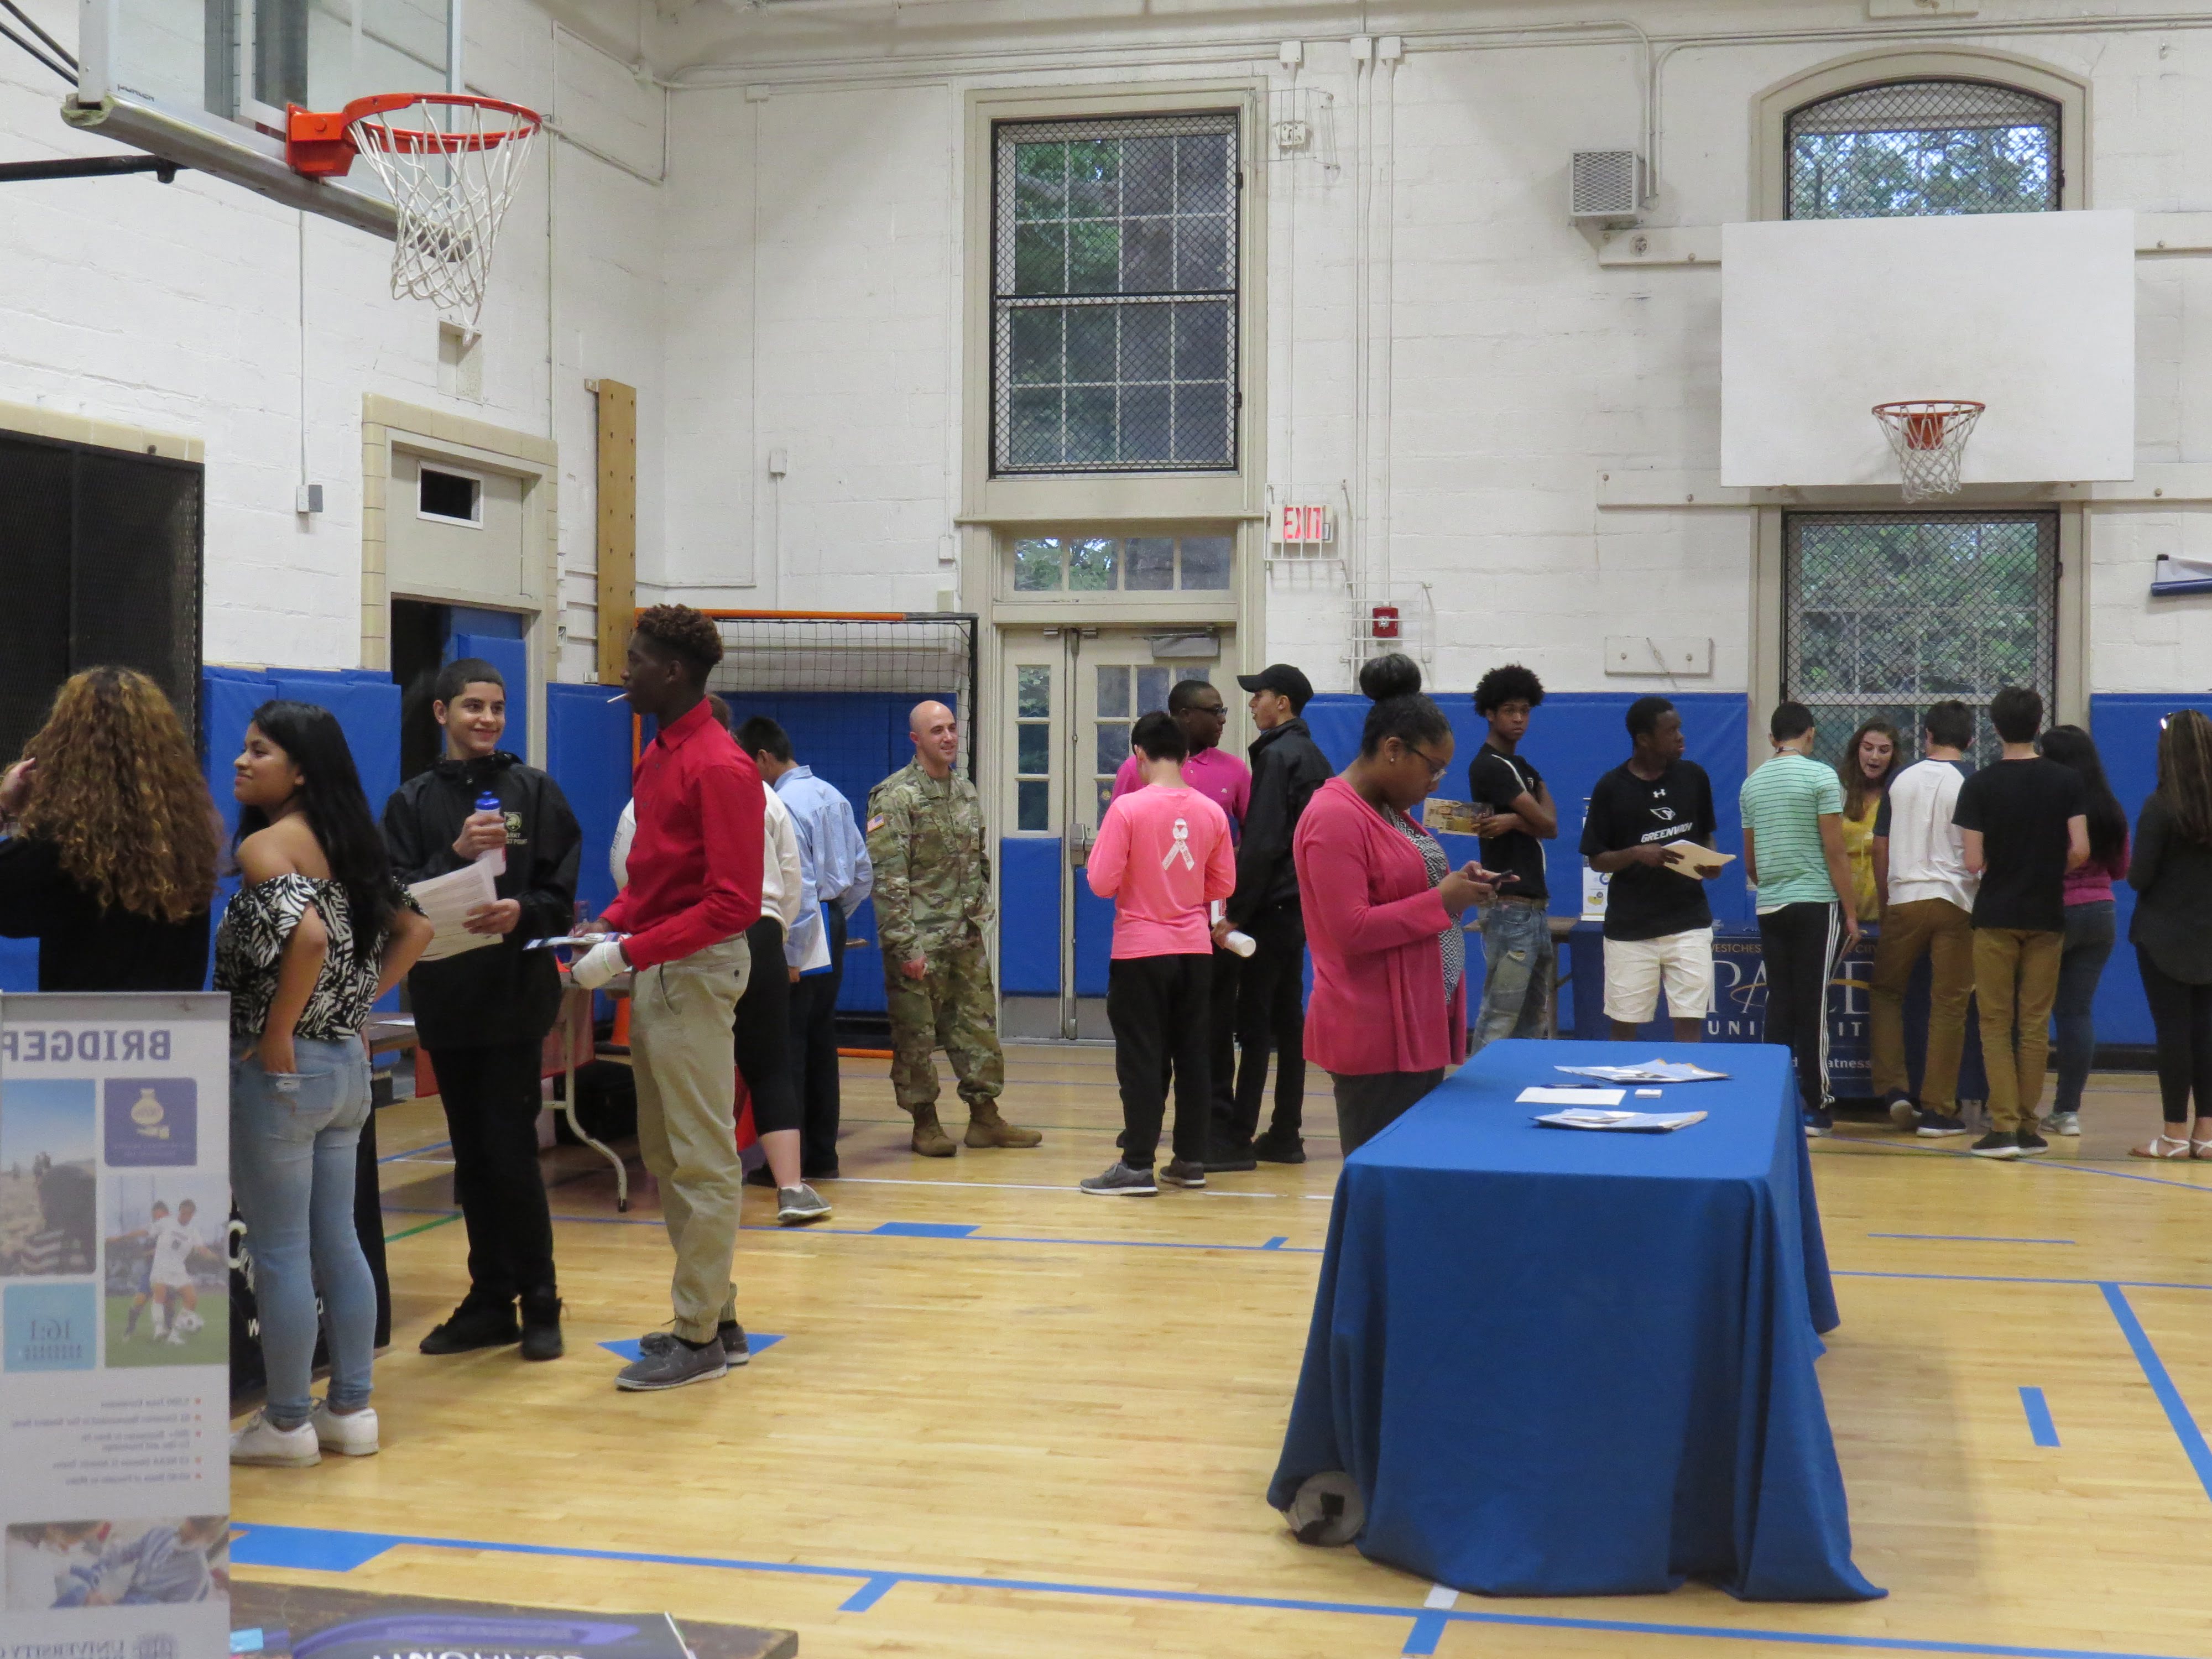 Boys & Girls Club of Greenwich holds second annual college fair geared towards first generation college students. May 23, 2017. Photo: Devon Bedoya